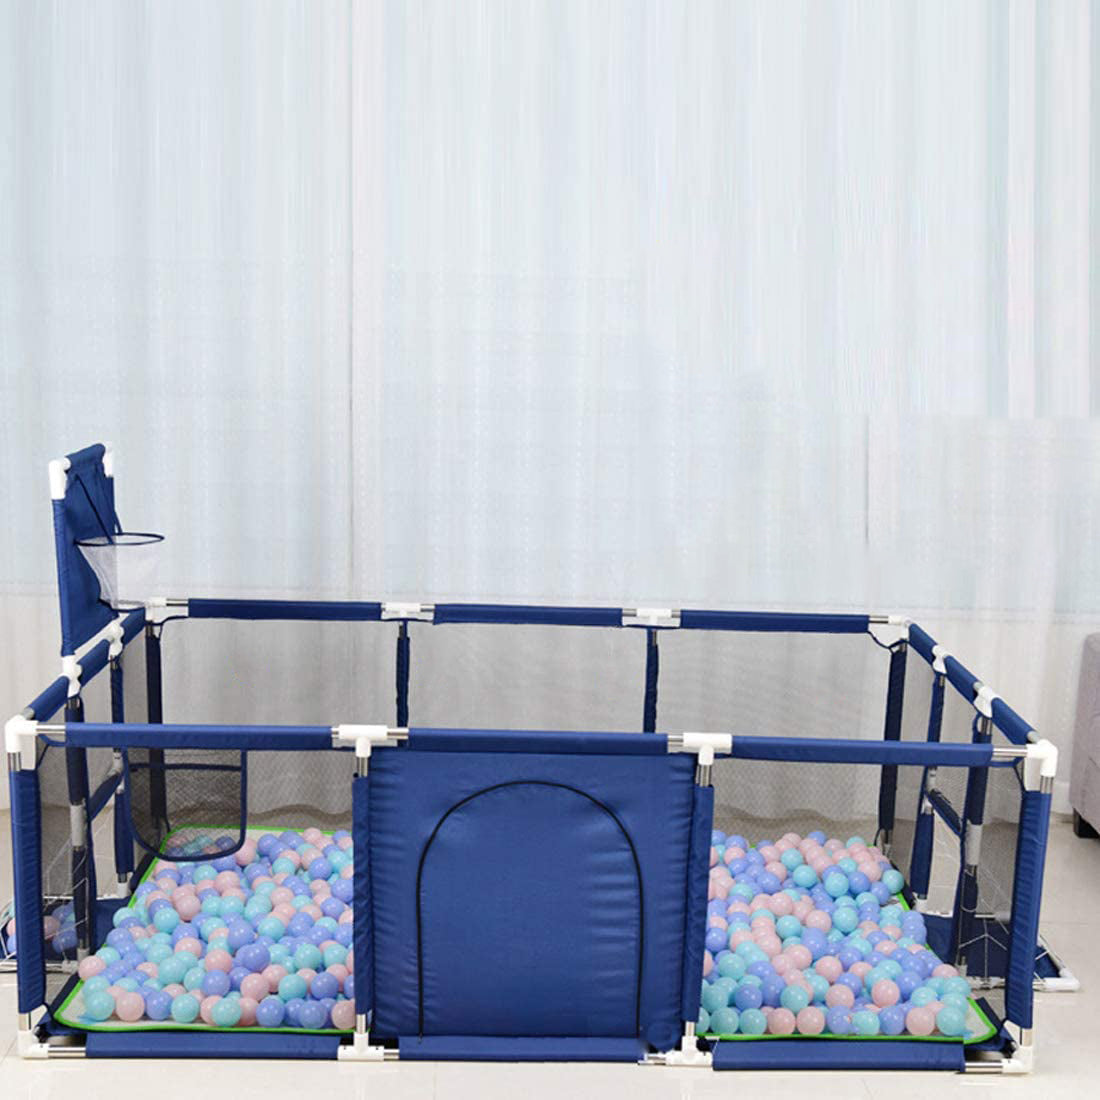 Babyip Extra Large Playpen | Play Yard for Babies | Football | Basketball |  Blue Online in Pakistan – Snug N' Play